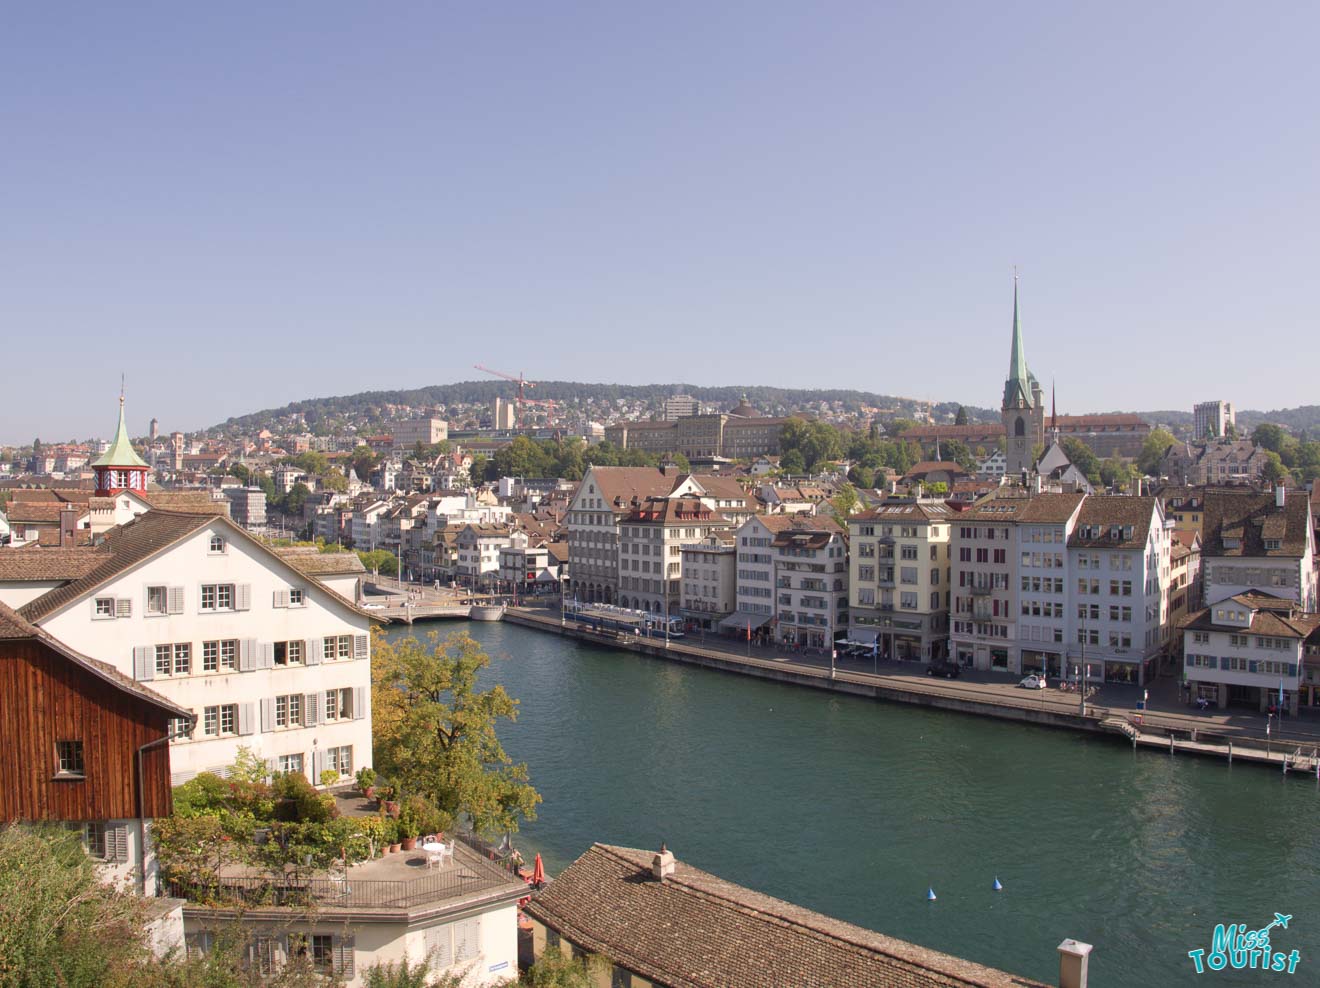 A scenic view of the Limmat river flowing through the historic center of Zurich, with a clear view of the Grossmünster church and surrounding old town buildings